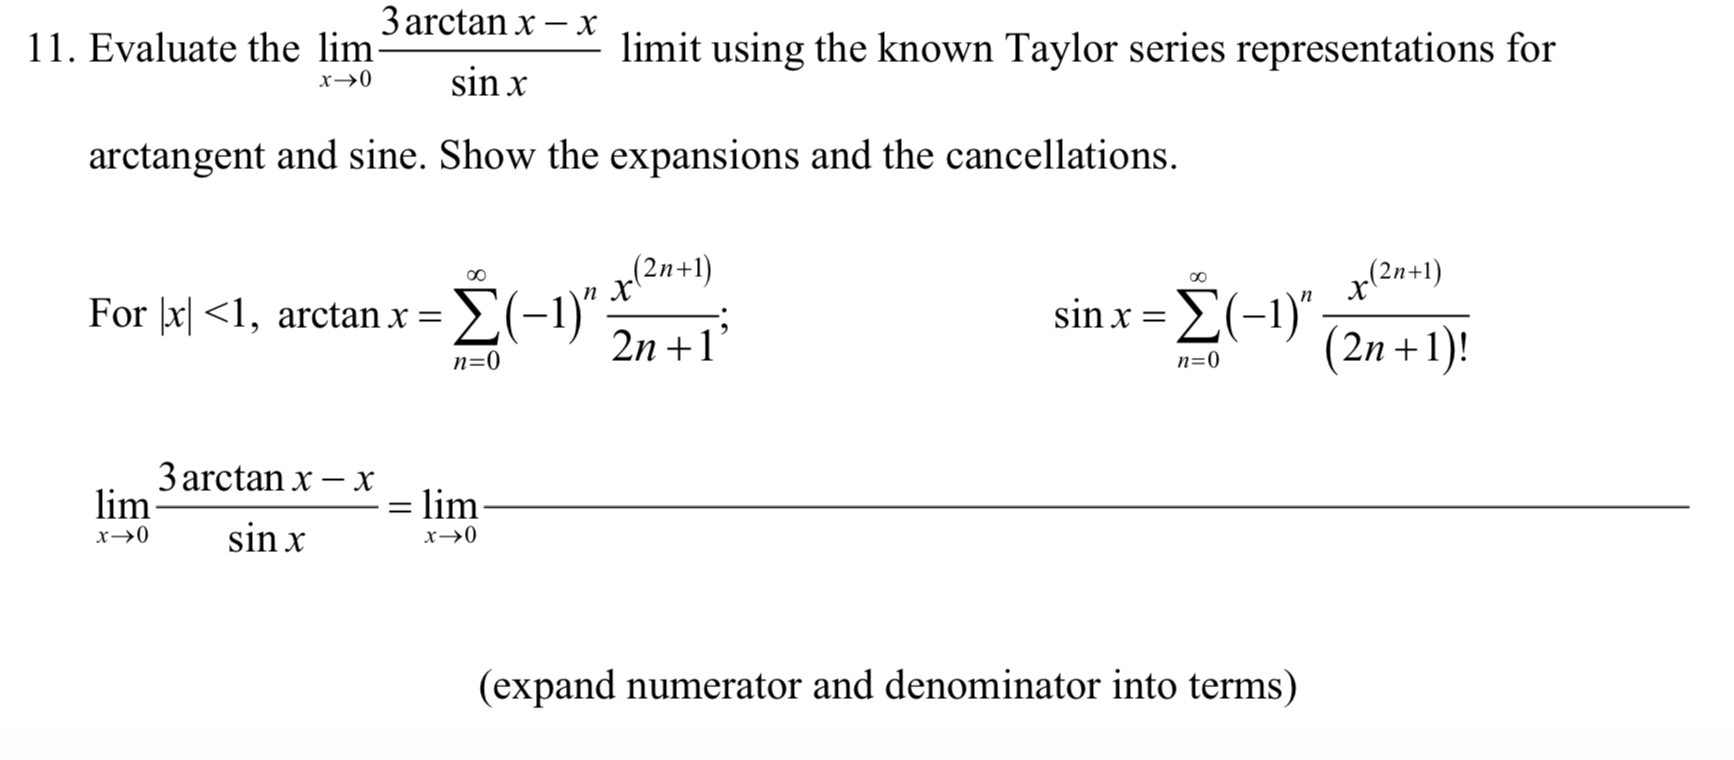 3 arctan x – x
11. Evaluate the lim-
limit using the known Taylor series representations for
sin x
arctangent and sine. Show the expansions and the cancellations.
(2n+1)
п X
(2n+1)
sinx Σ(-1),
(2n +1)!
For þx| <1, arctan x = 2(-1)" ·
2n +1'
n=0
n=0
3 arctan x – x
lim
= lim
sin x
х>0
(expand numerator and denominator into terms)
